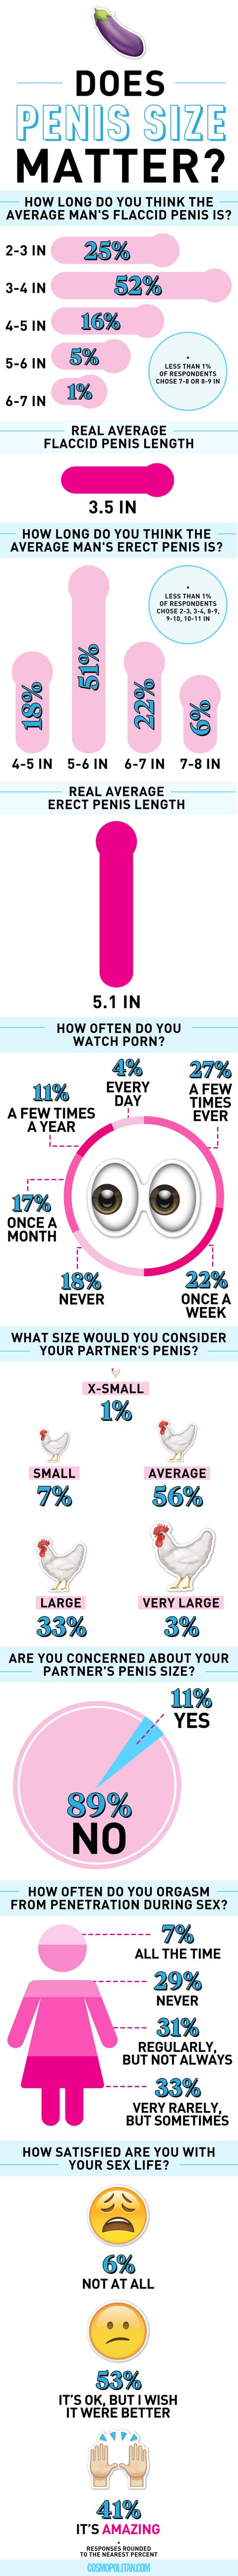 Dick Size - Here's What Millennial Women Really Think About Penis Size